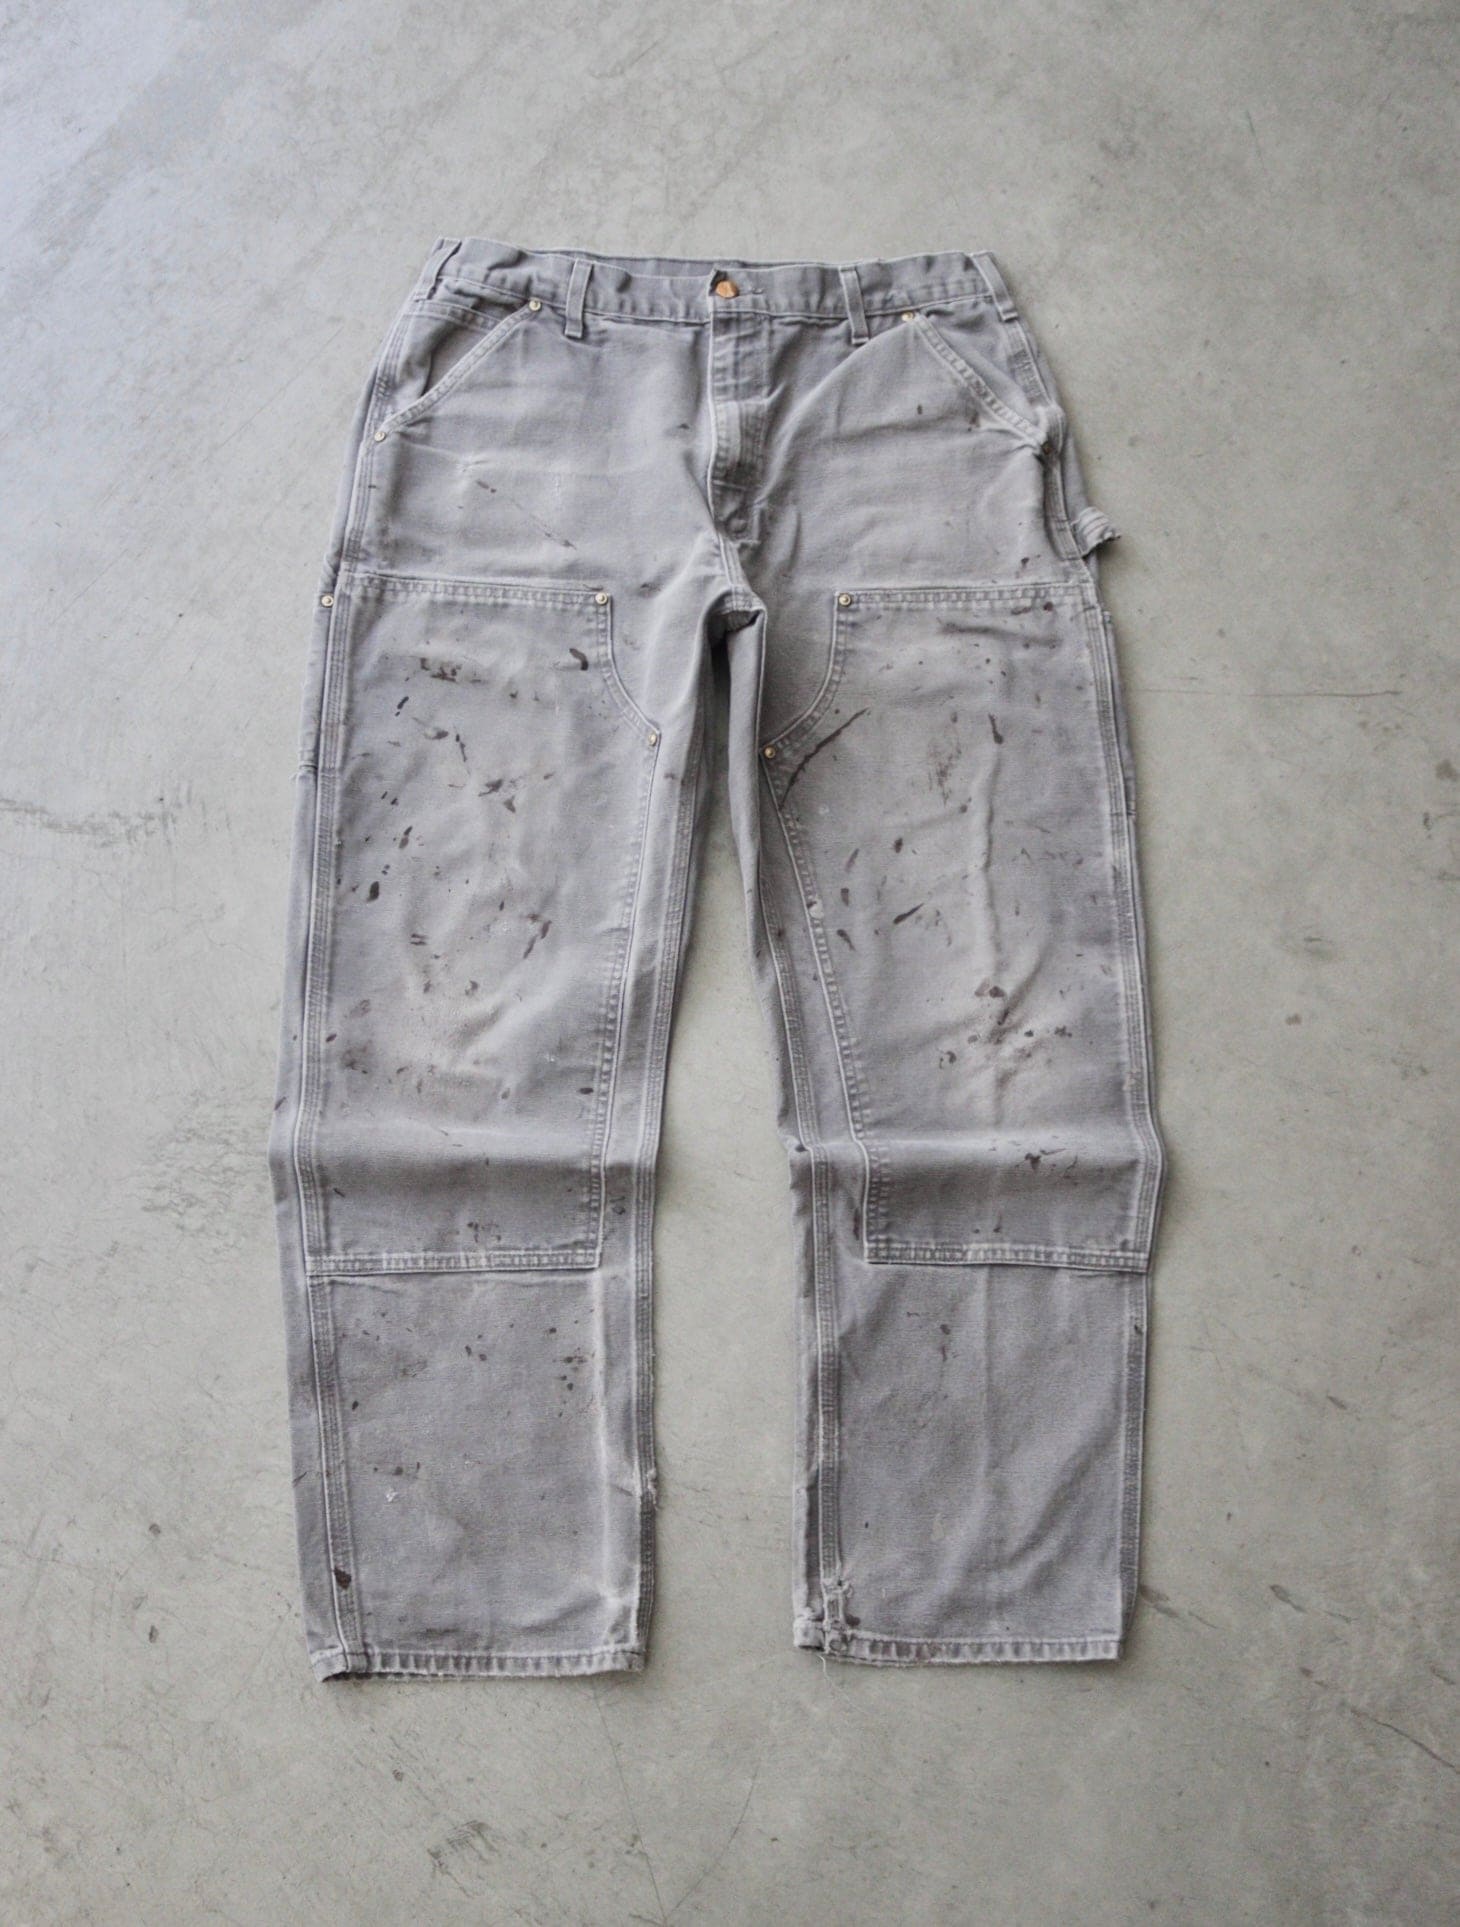 CARHARTT FADED STAINED WORK PANTS